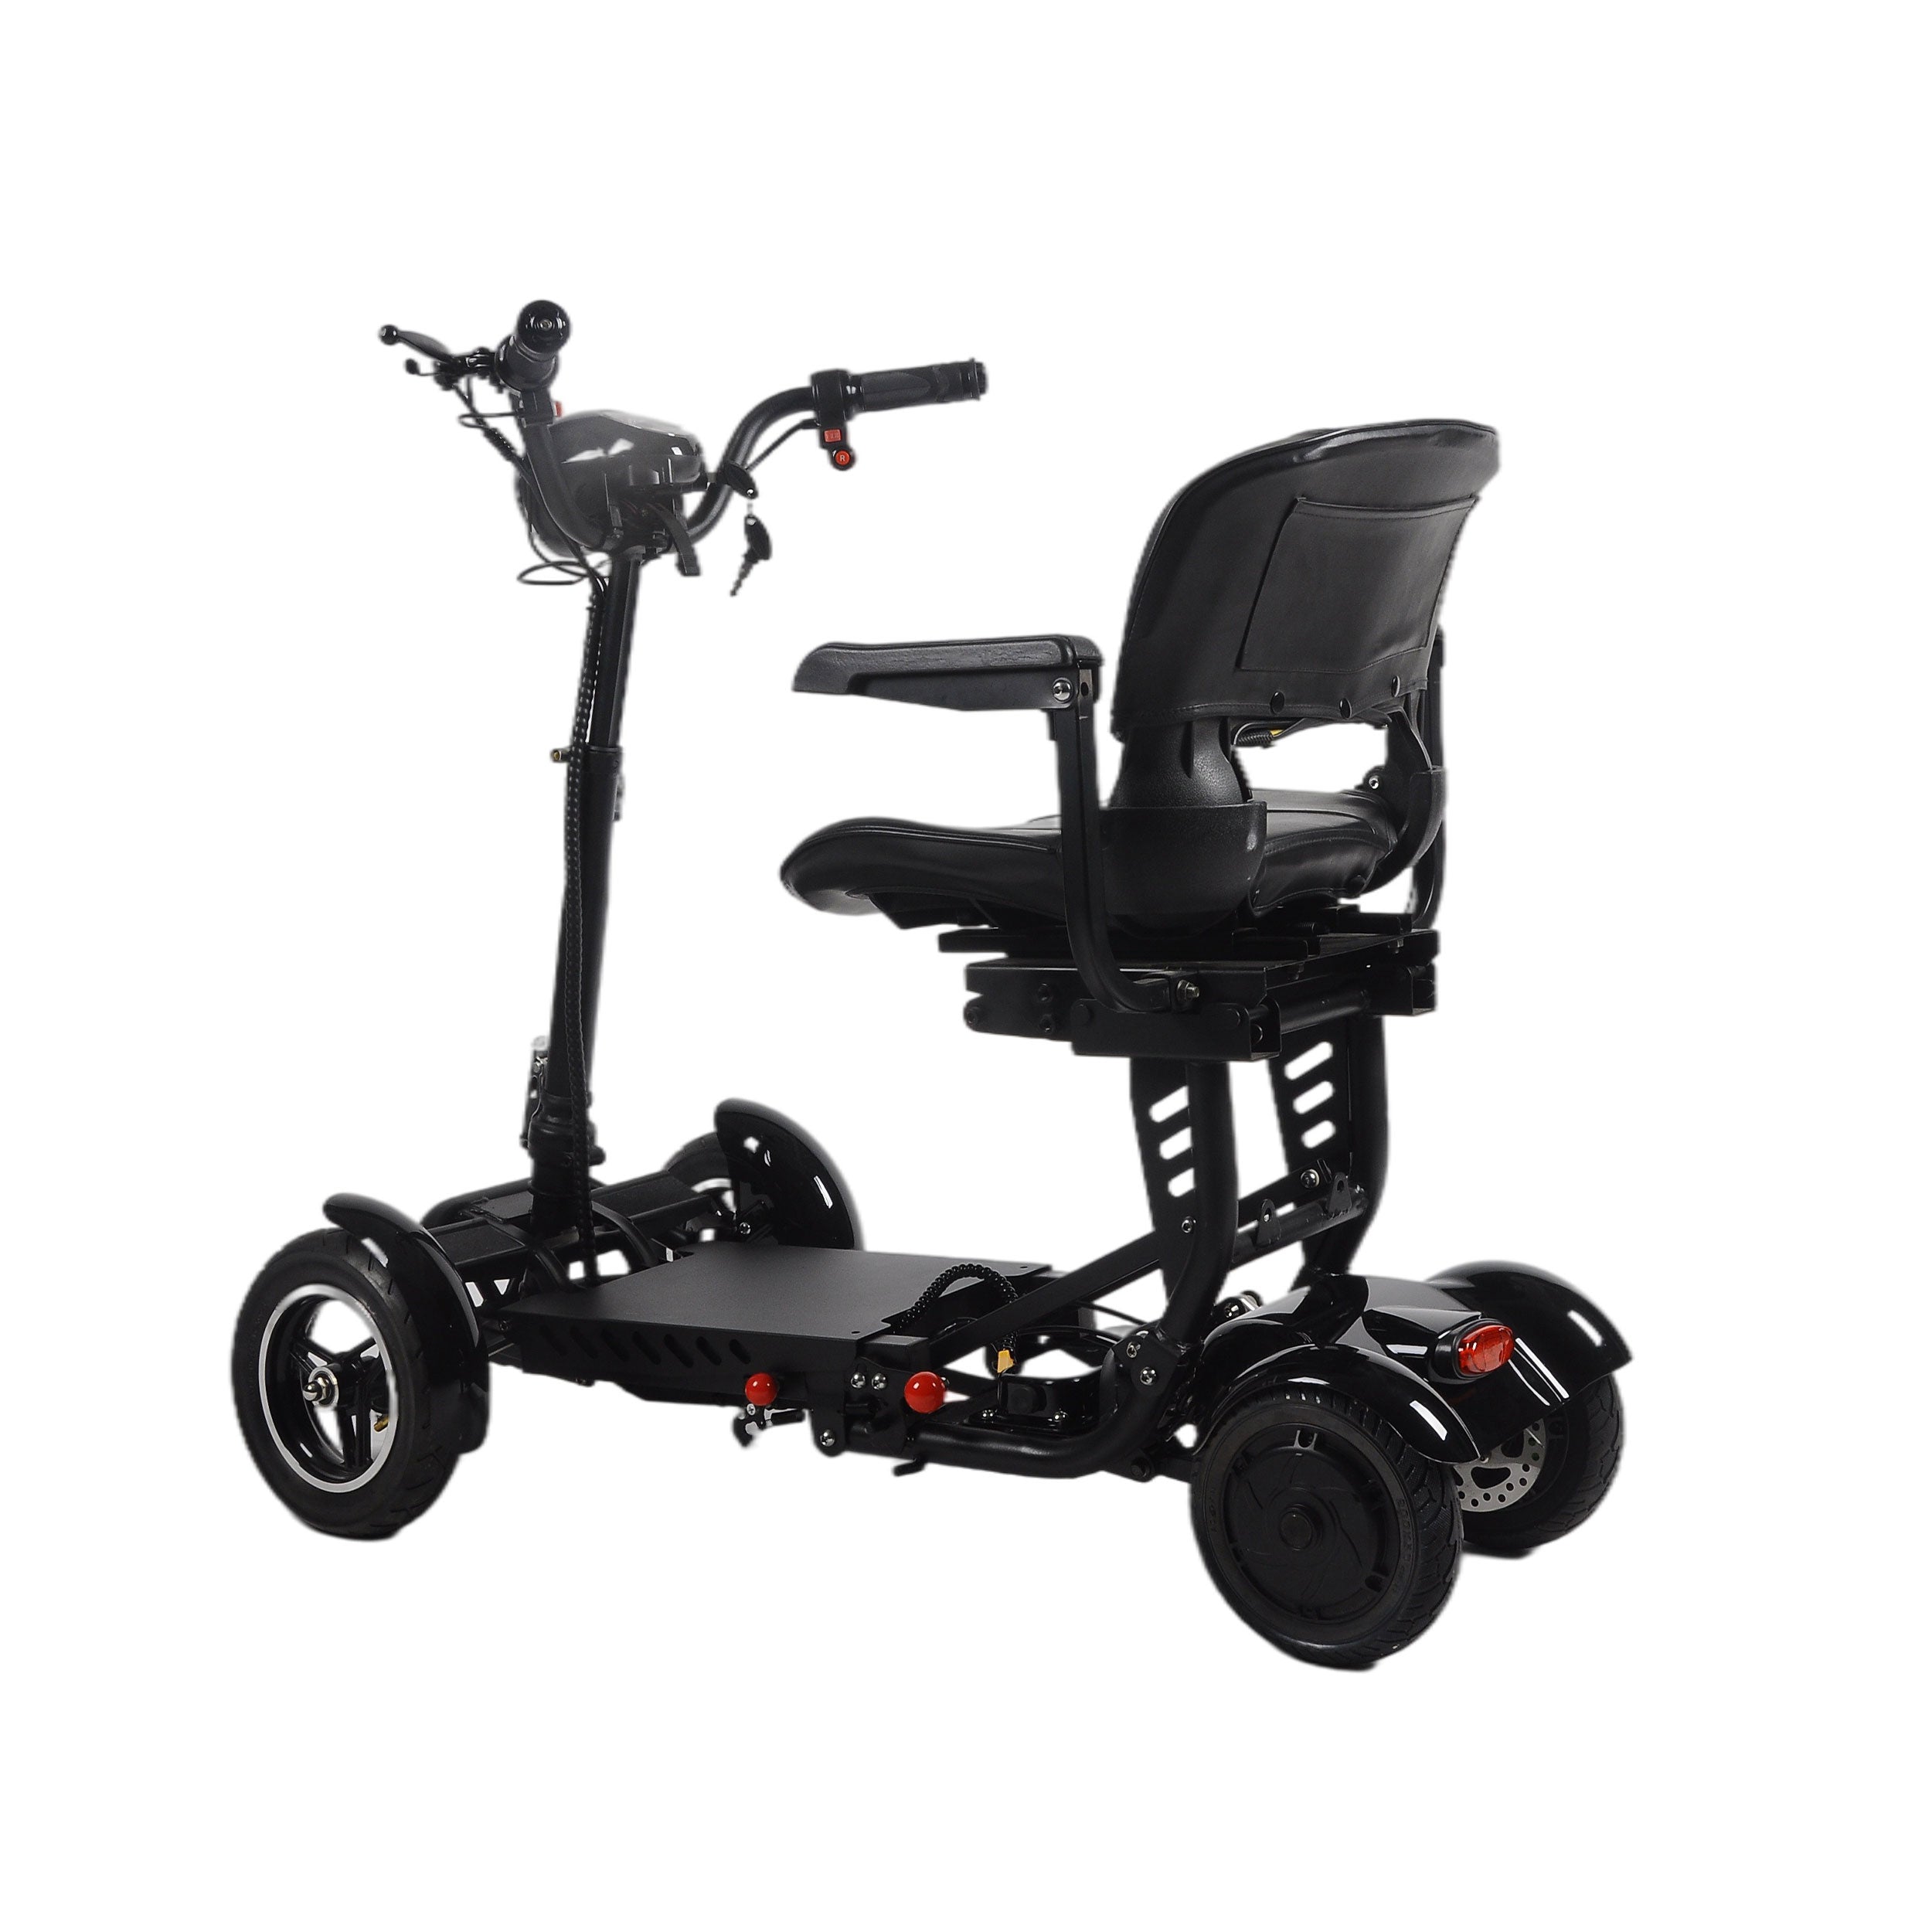 Rubicon FX mobility scooters for adults